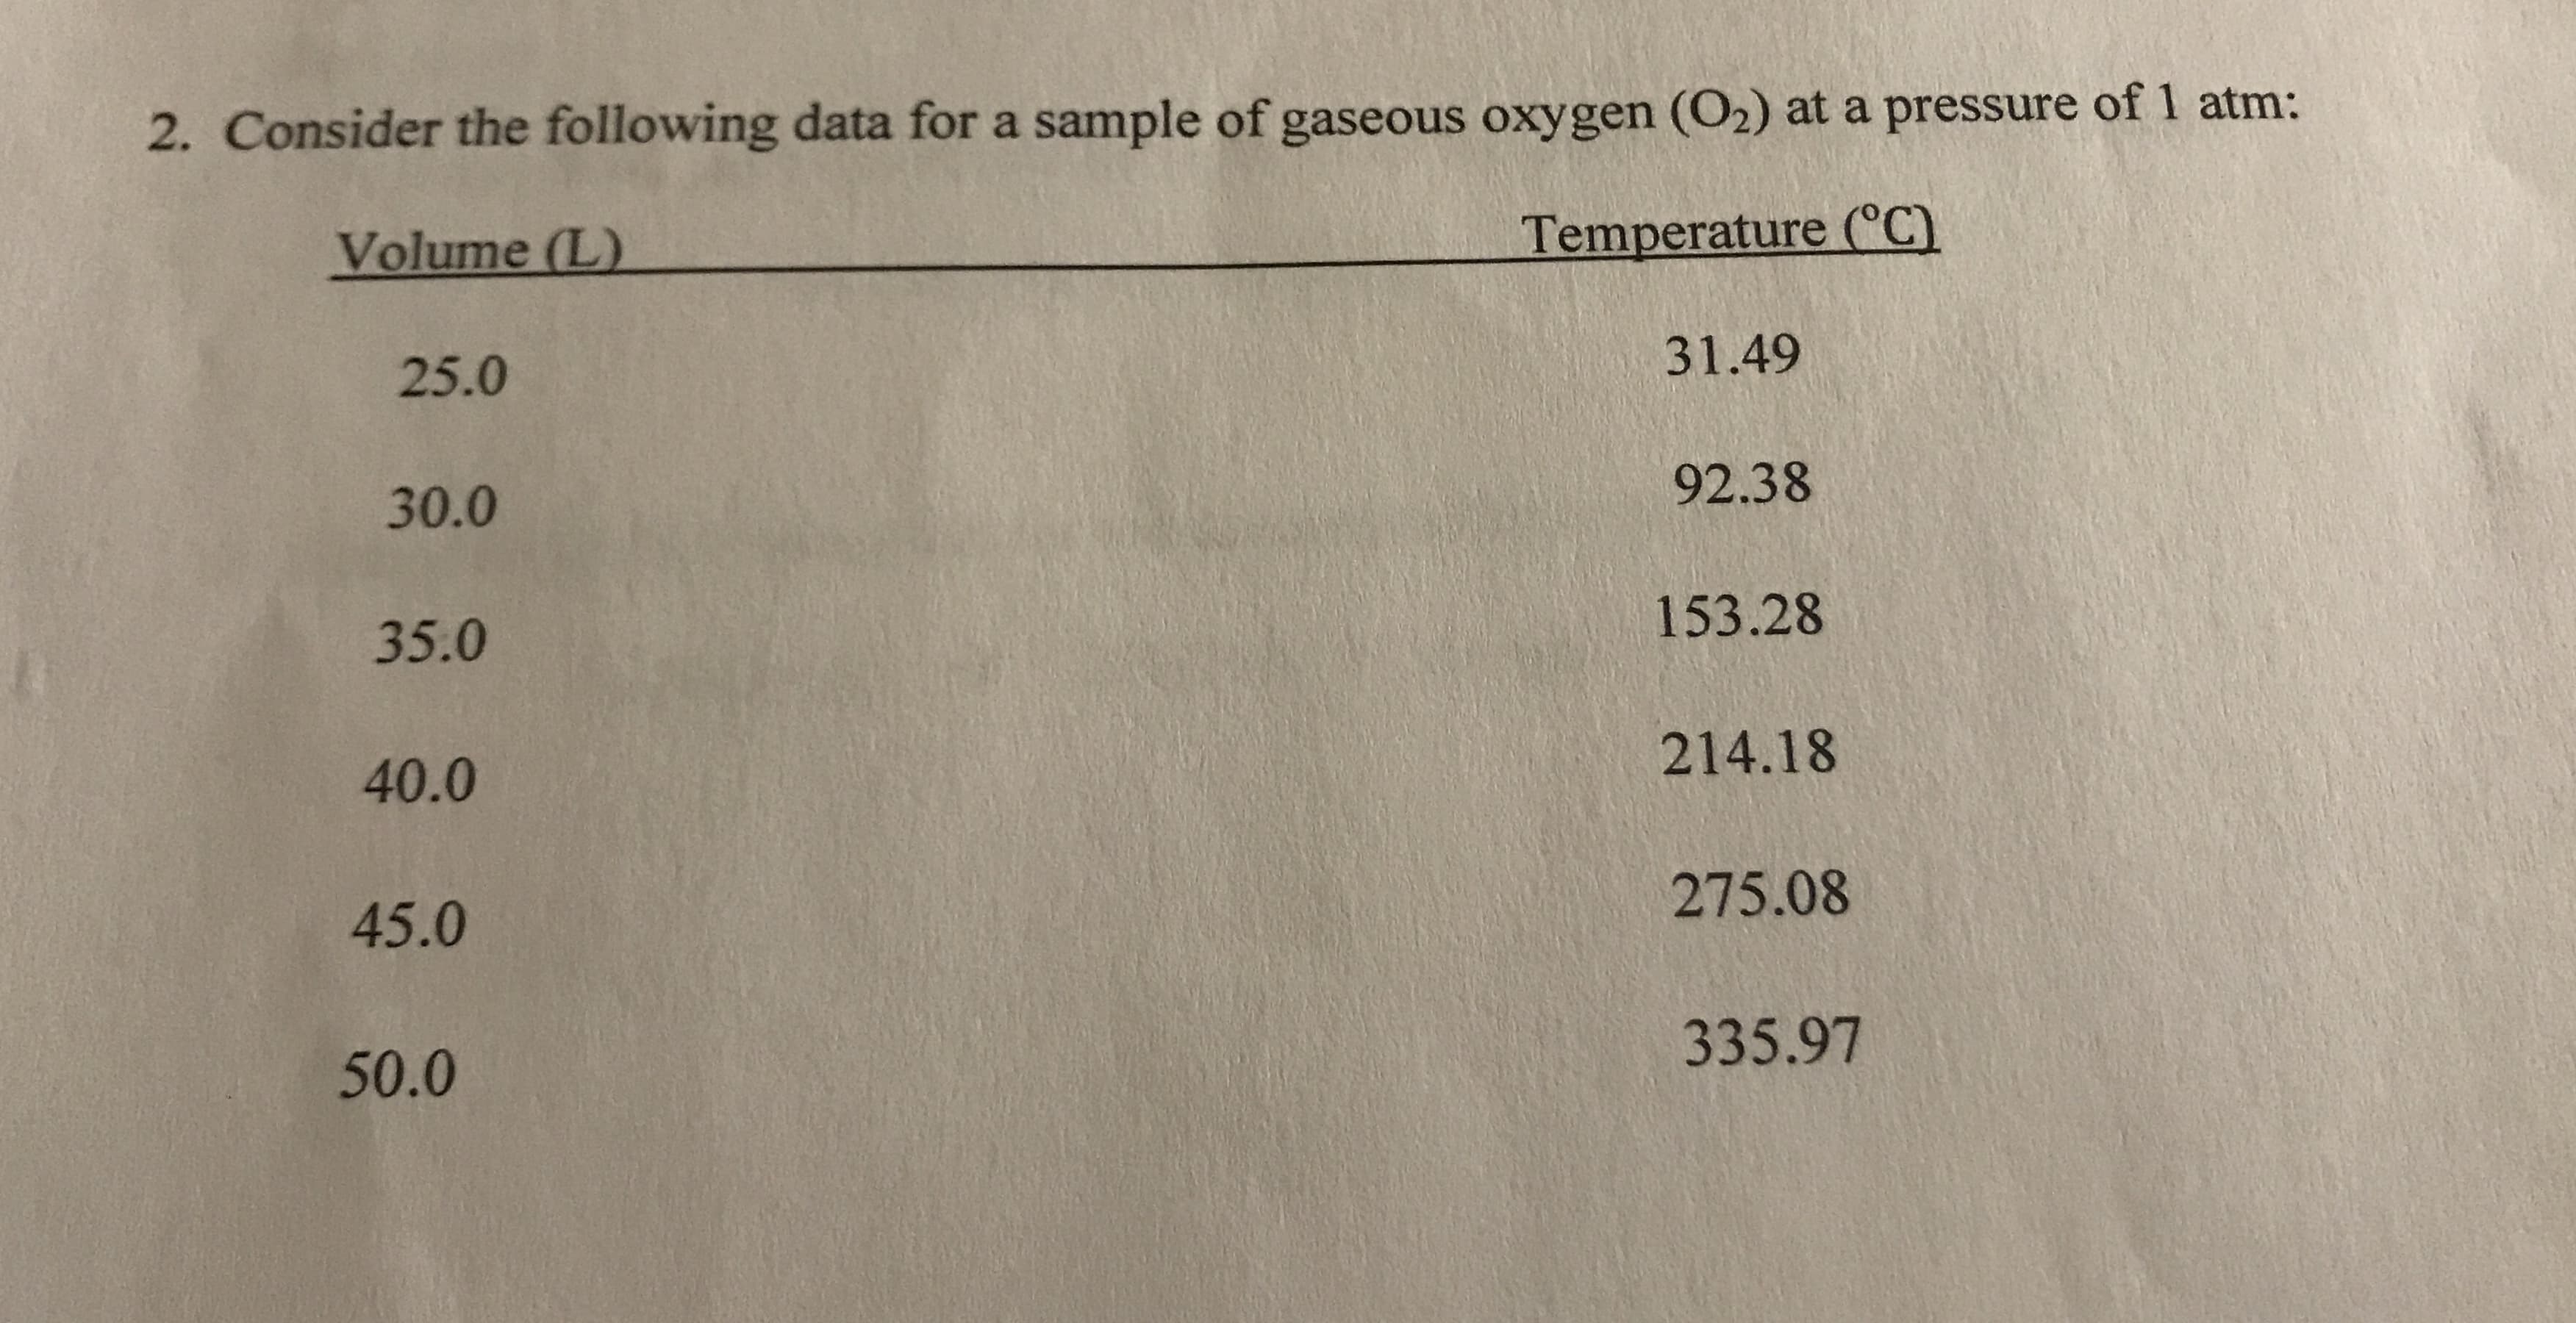 2. Consider the following data for a sample of gaseous oxygen (O2) at a pressure of 1 atm:
Temperature (CC)
Volume (L)
31.49
25.0
92.38
30.0
153.28
35.0
214.18
40.0
275.08
45.0
335.97
50.0
